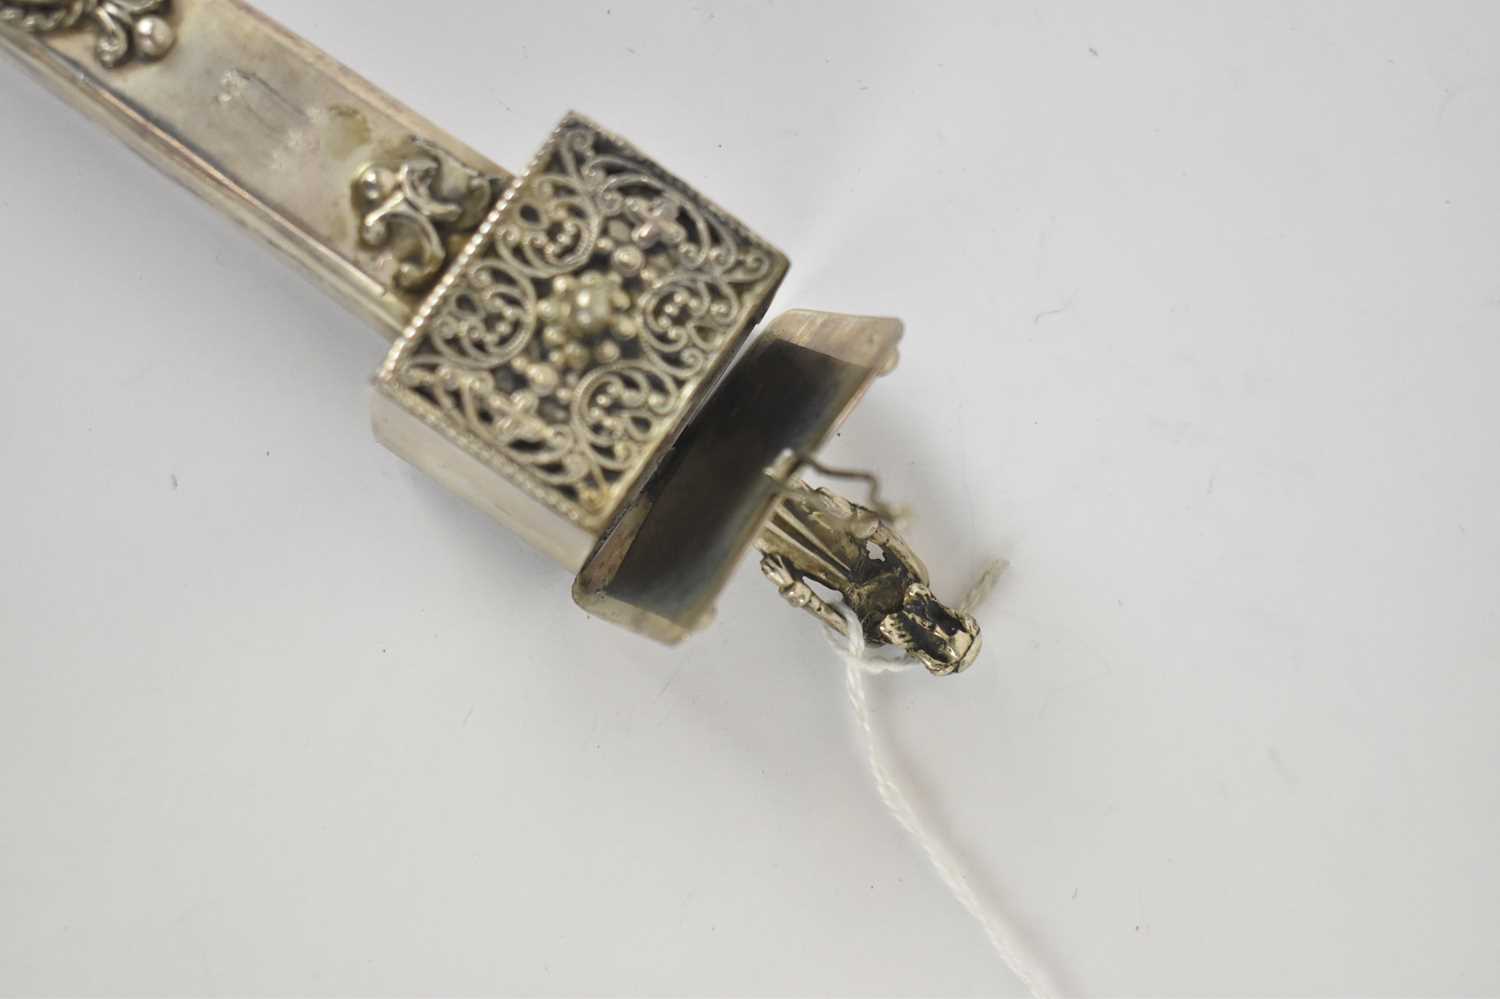 JUDAICA; a late 19th century Russian/Polish silver yad or Torah pointer, the top with hinged spice - Image 2 of 3